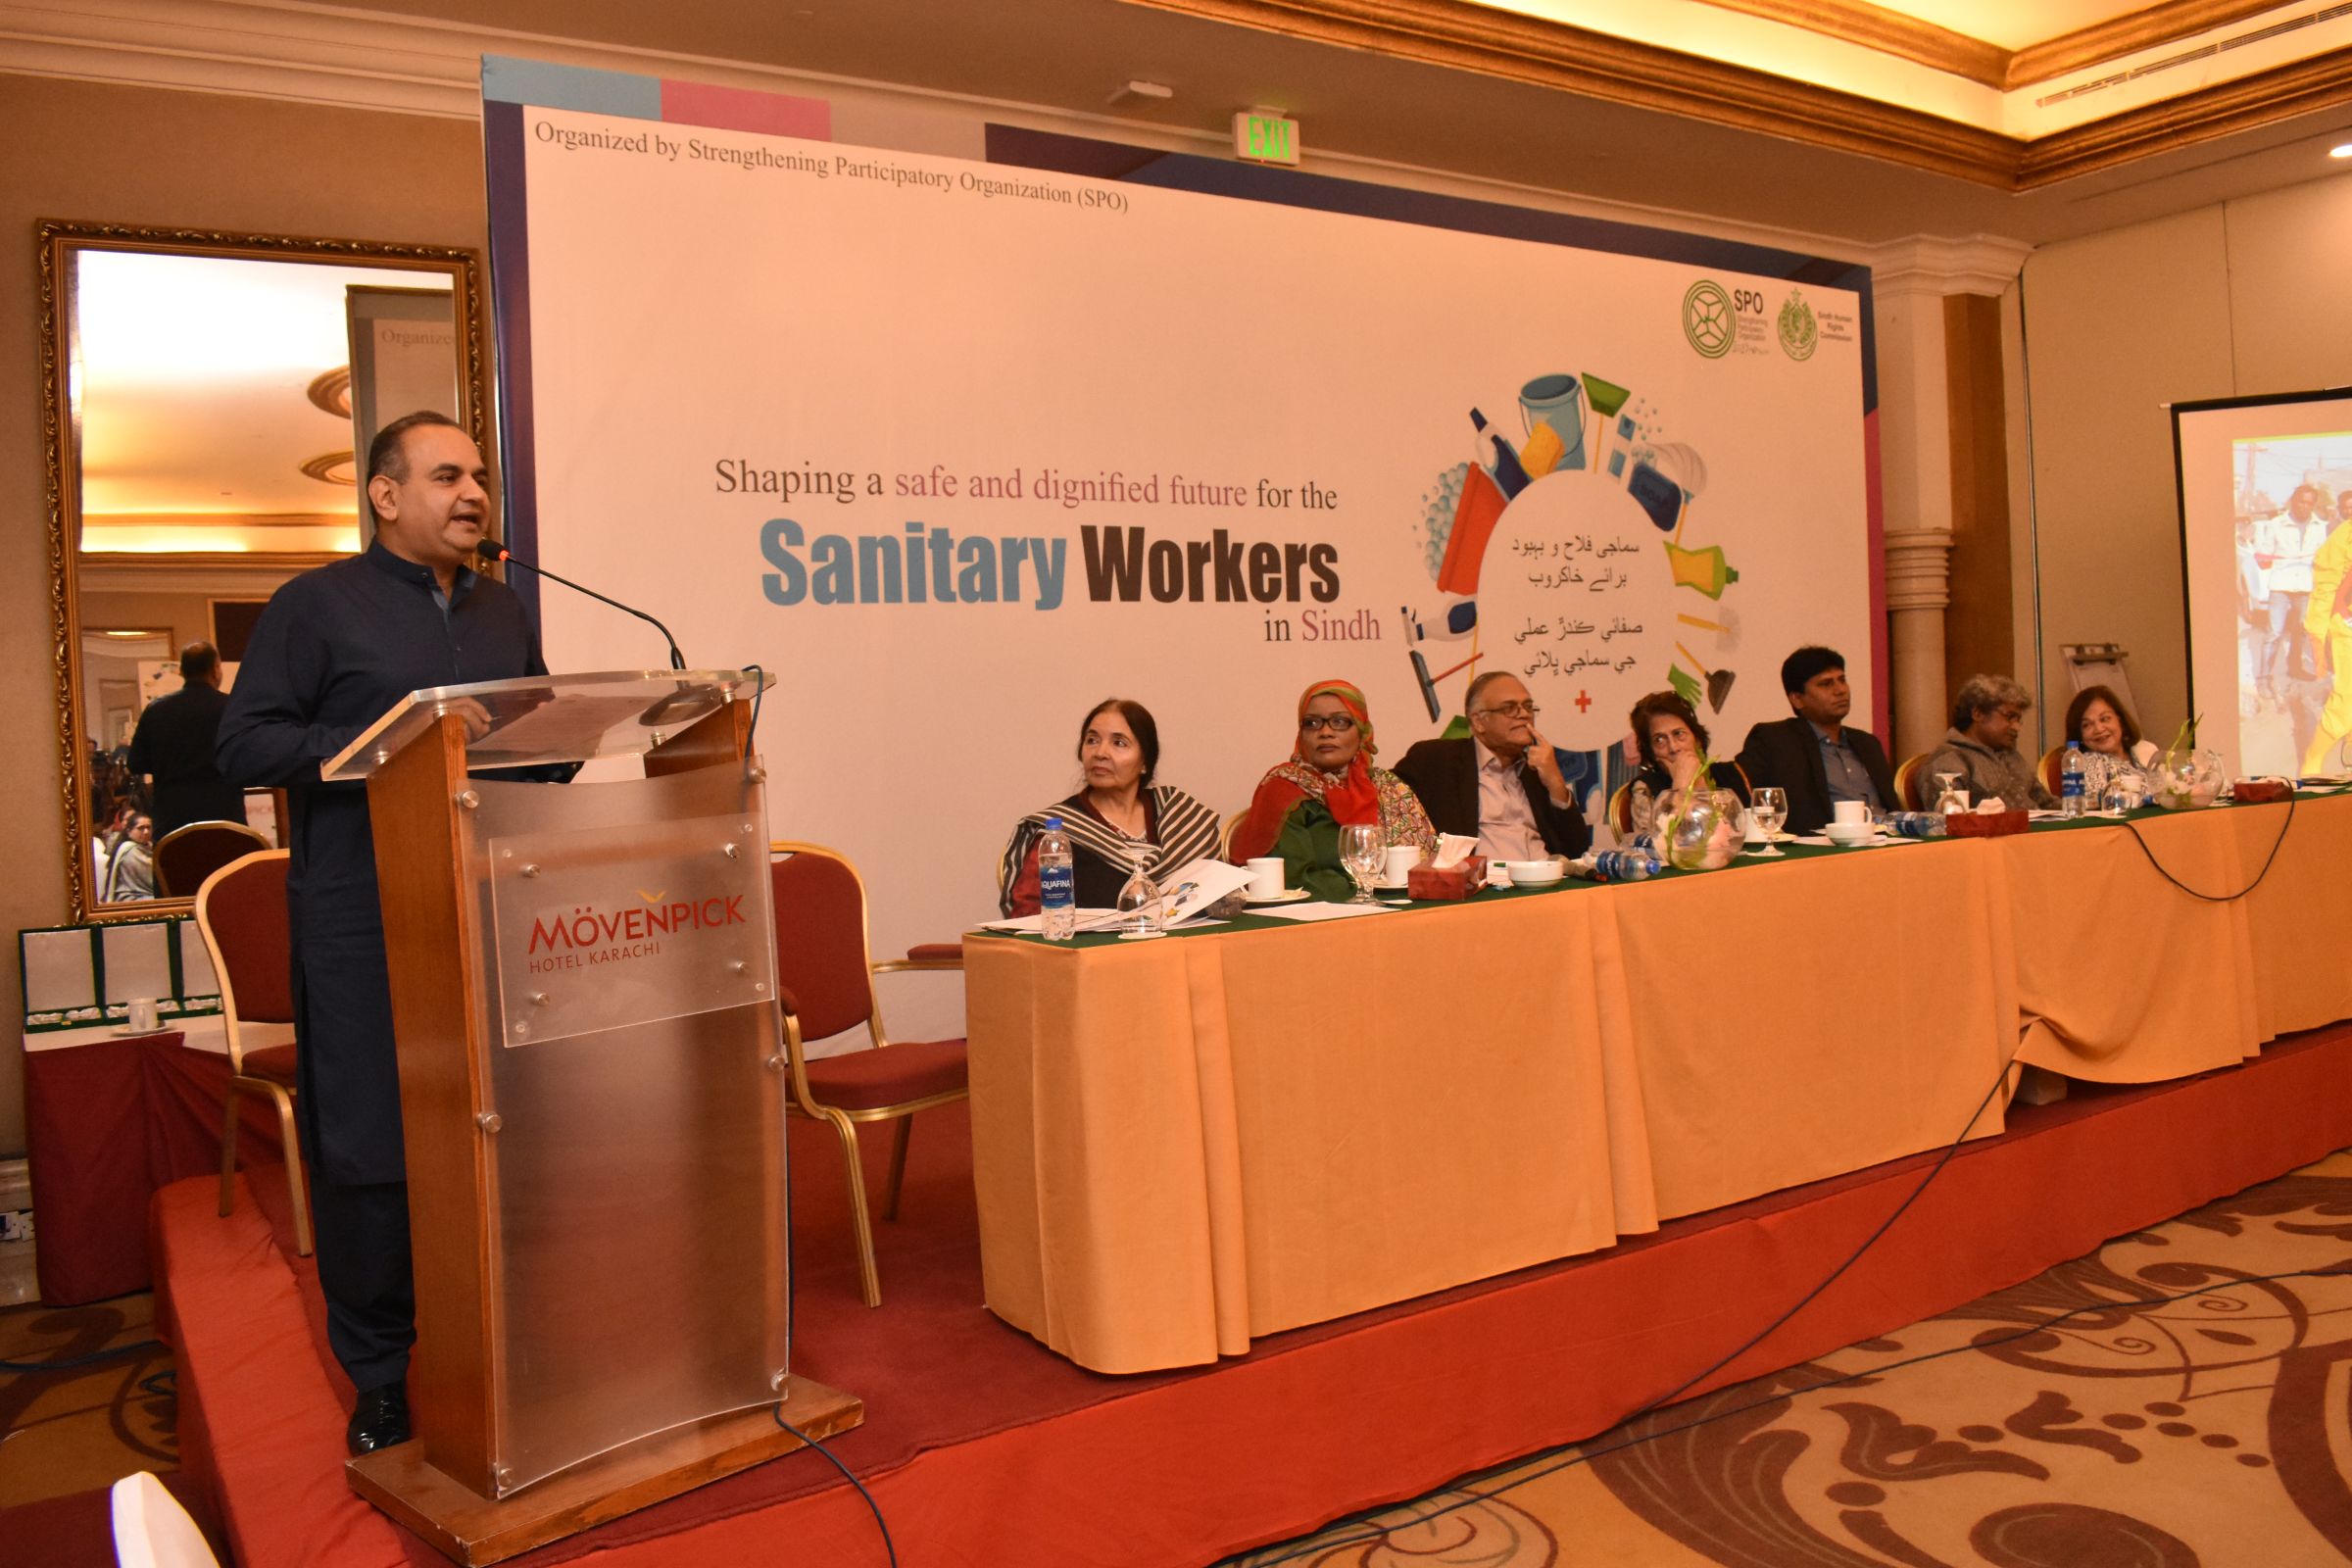 Conference on “Shaping a Safe and Dignified Future for the Sanitary Workers in Sindh”